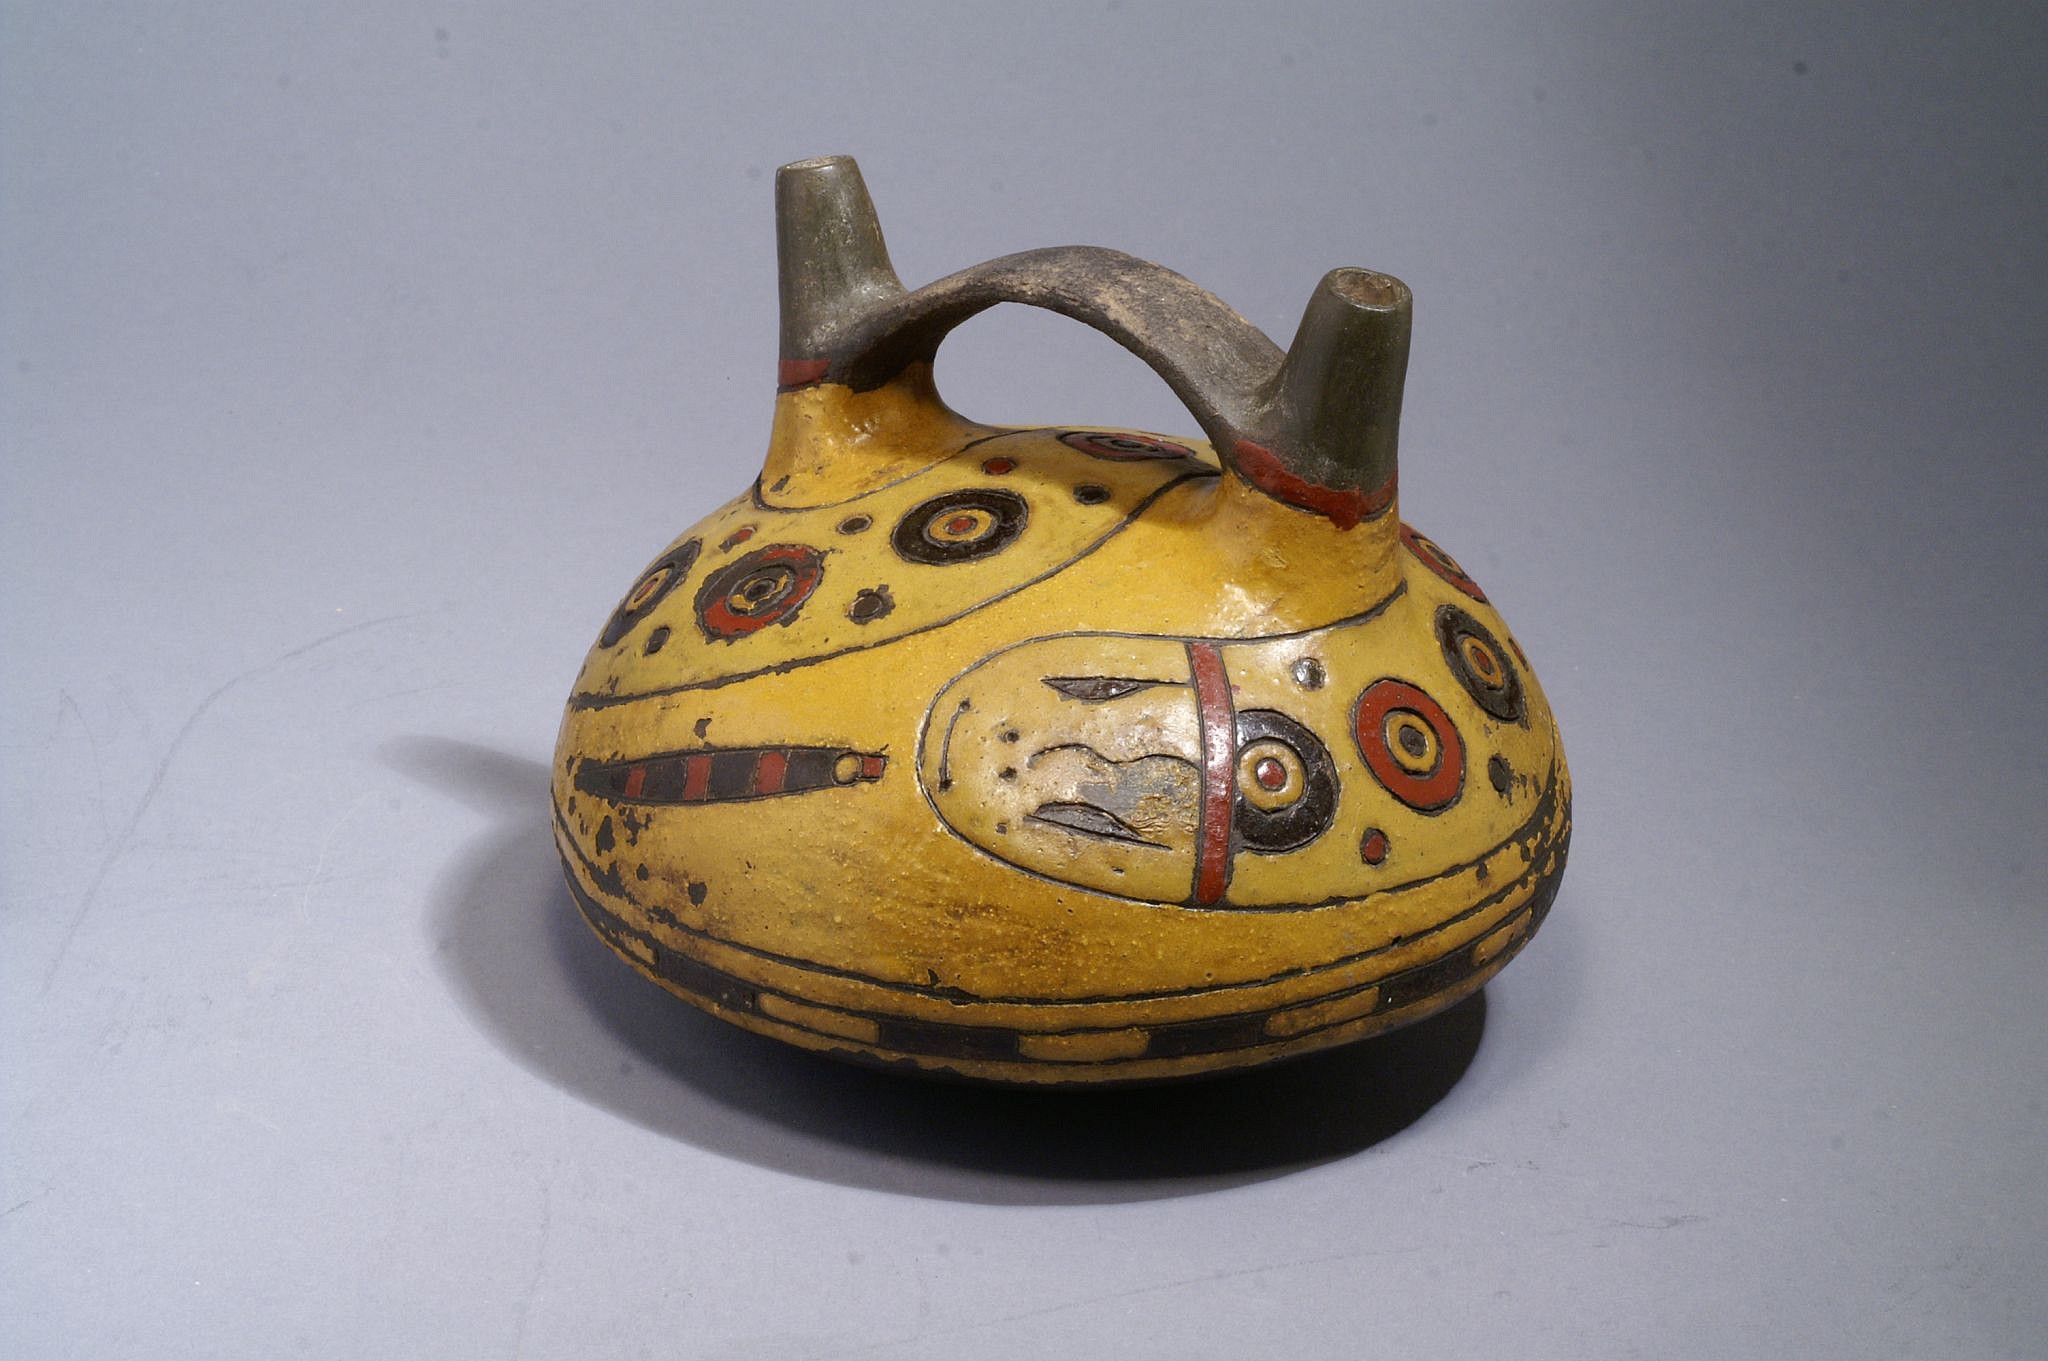 Peru, Paracas Bridge Spout Vessel Painted with Double-headed Undulating Eel
This vessel was painted with two neighboring hues of neutral yellow resinous paint, one for the ground and the other for the double-headed serpent. The rare color palette of this vessel departs from that of most Paracas vessels, which generally employ starkly contrasting colors.  The animal depicted in the painting is probably an Amphisbaena, a species of worm-like snakes whose tails resemble heads as an evolutionary adaptation to fool predators. Acquired from a Miami collector in 2006. Period: Peru, Paracas, Ocucaje Phase 9, Ica valley, South Coast, c. 300 - 200 BC
Media: Ceramic
Dimensions: Diameter: 6 1/4" x Height: 5"
$8,750
M6088